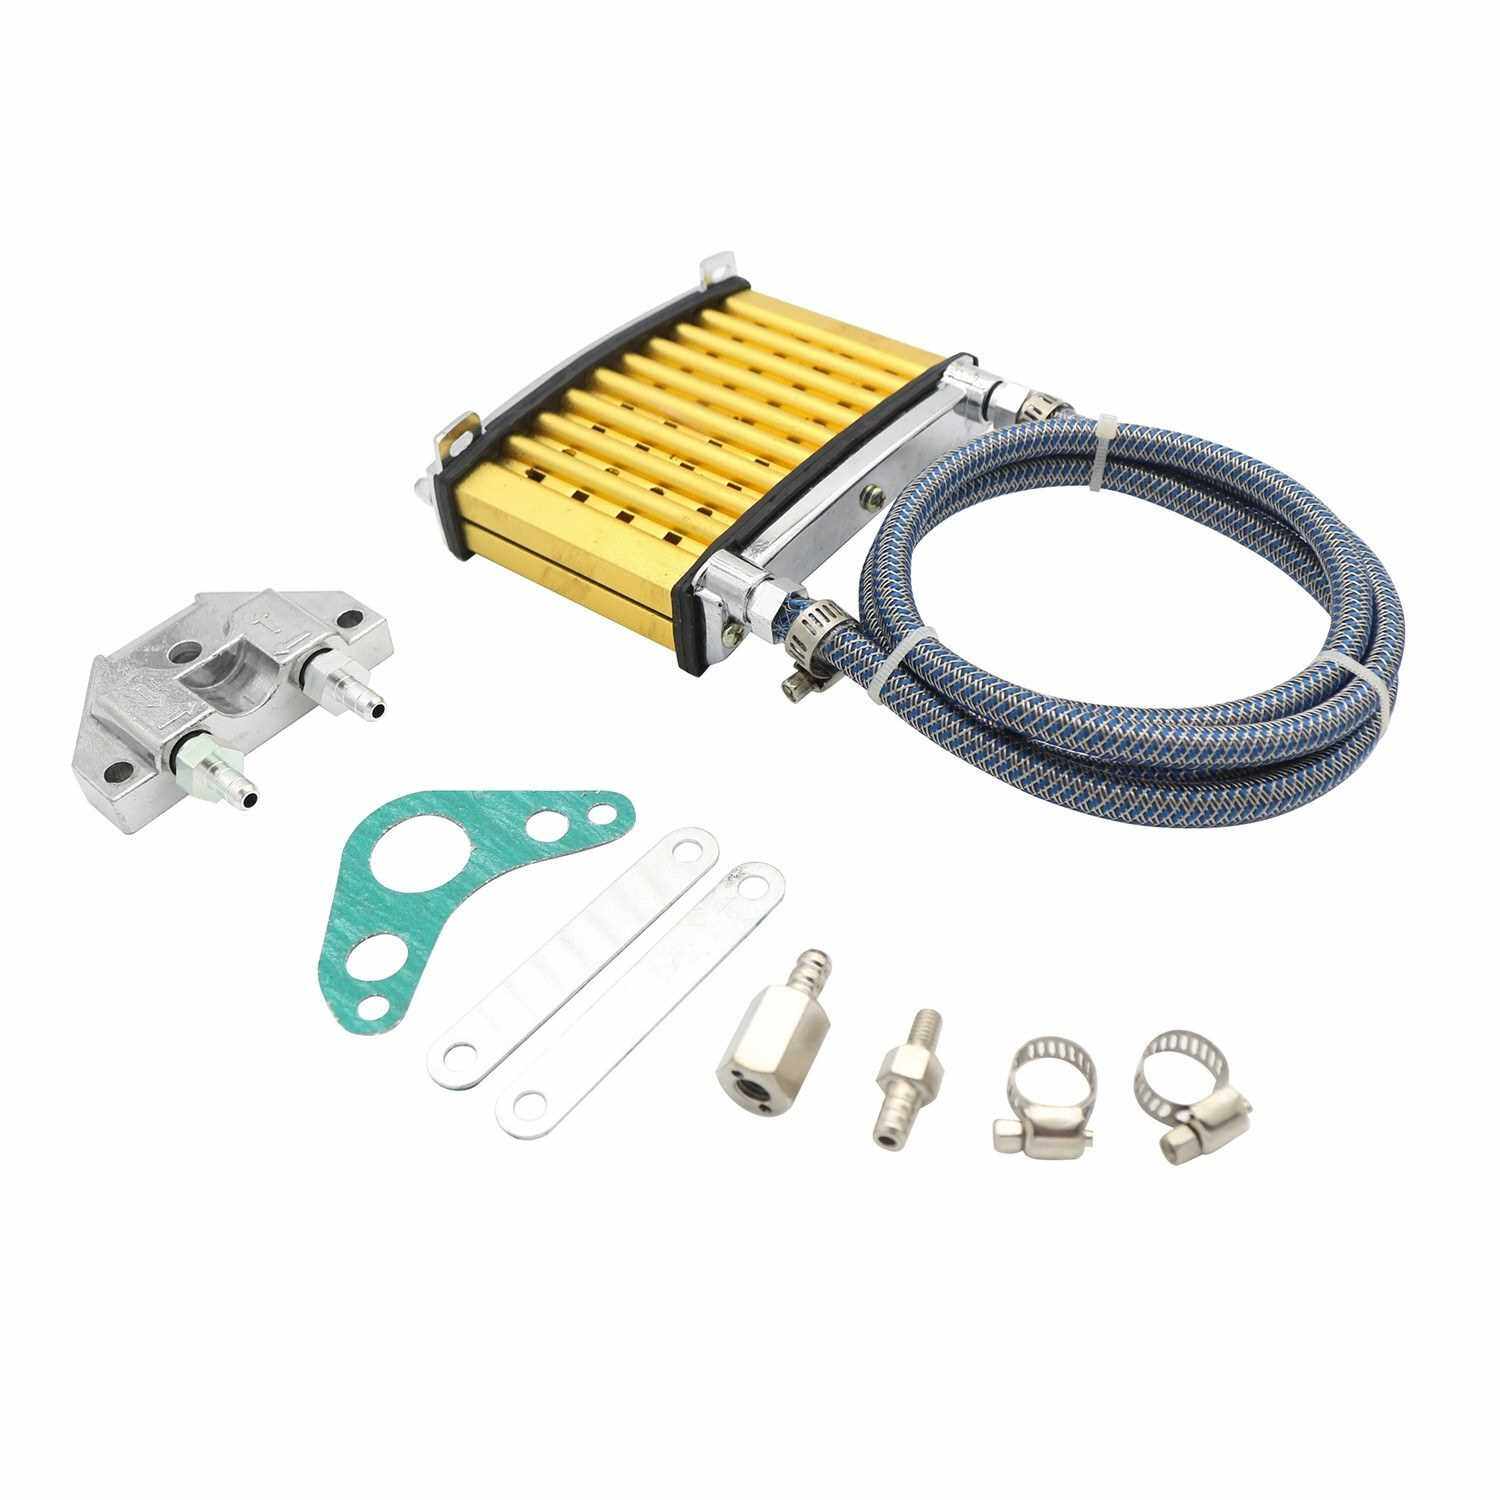 Universal Motorcycle Engine Oil Cooler Cooling Radiator For 50cc 70cc 90cc 110cc 125cc Dirt Pit Bike ATV (Yellow)